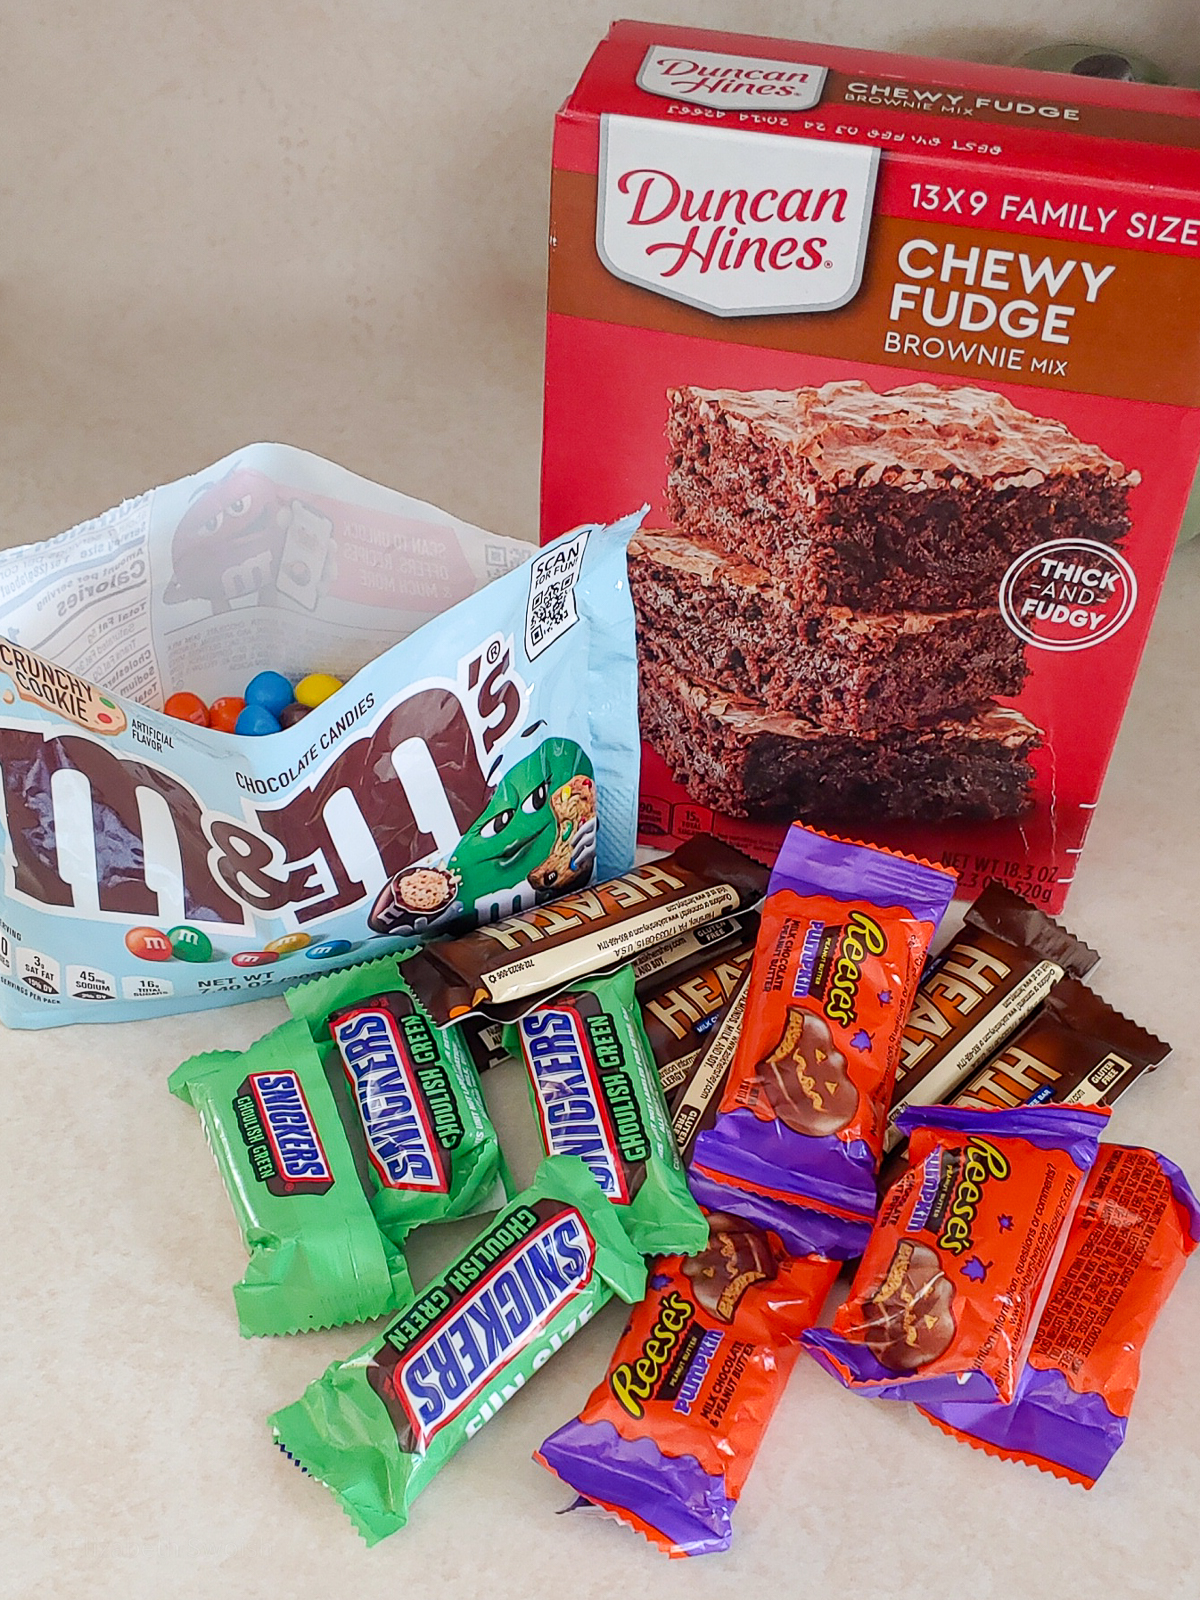 Ingredients. Boxed brownie mix and leftover Halloween candy.